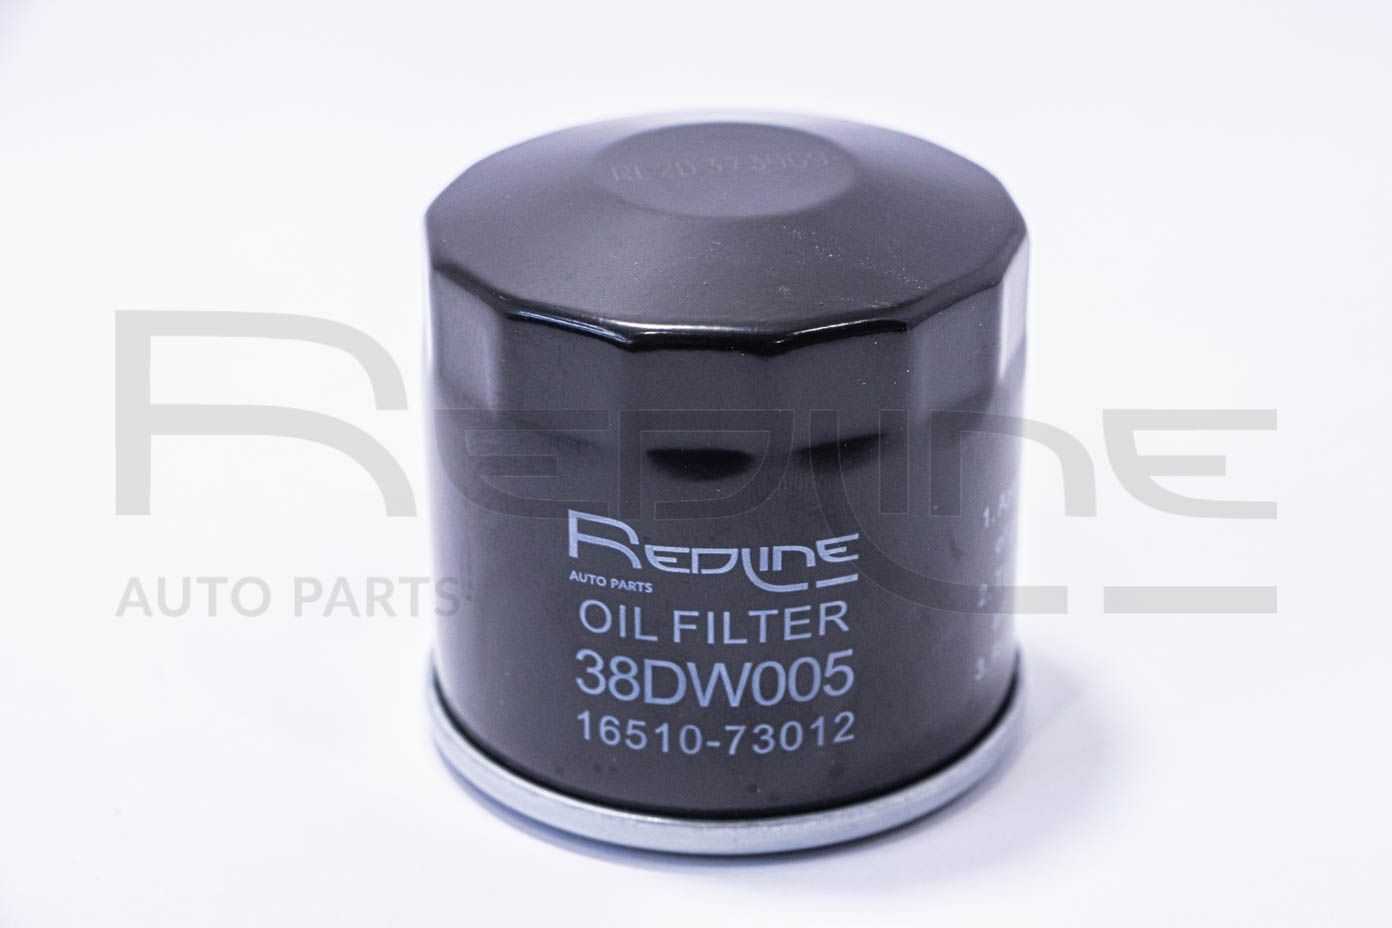 RED-LINE 38DW005 Oil filter 15601 97201